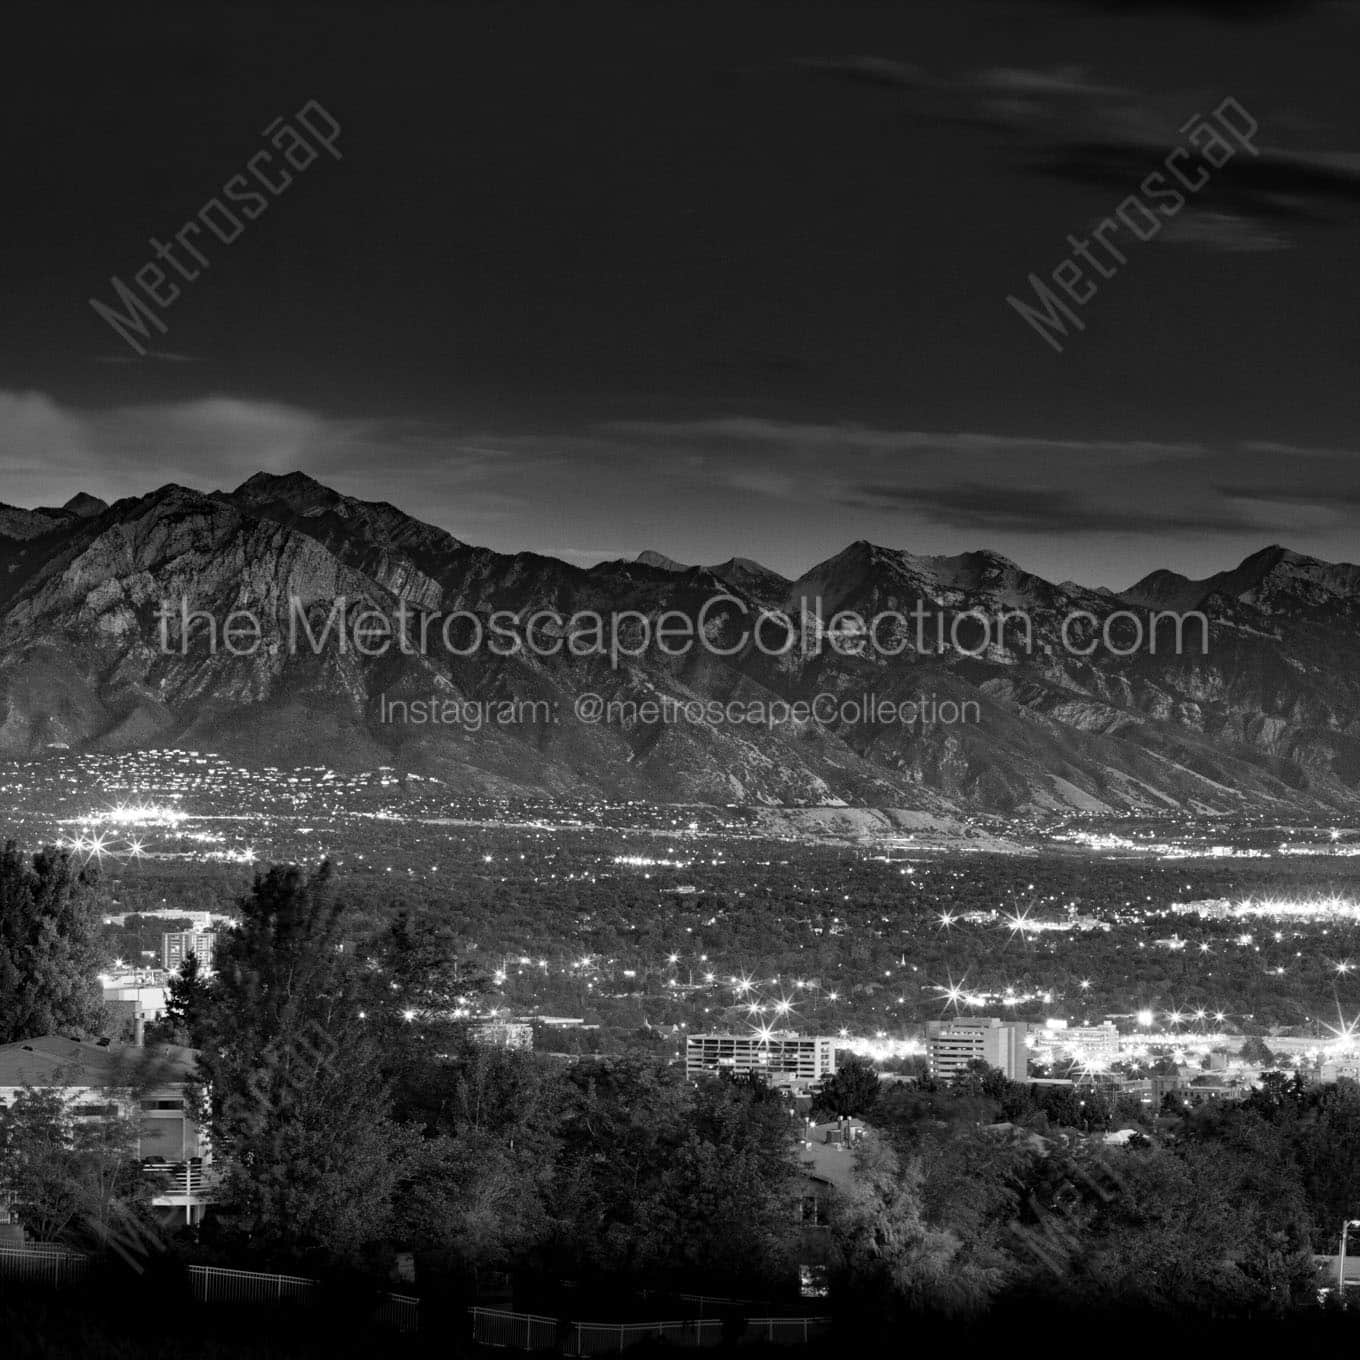 wasatch mountains Black & White Office Art